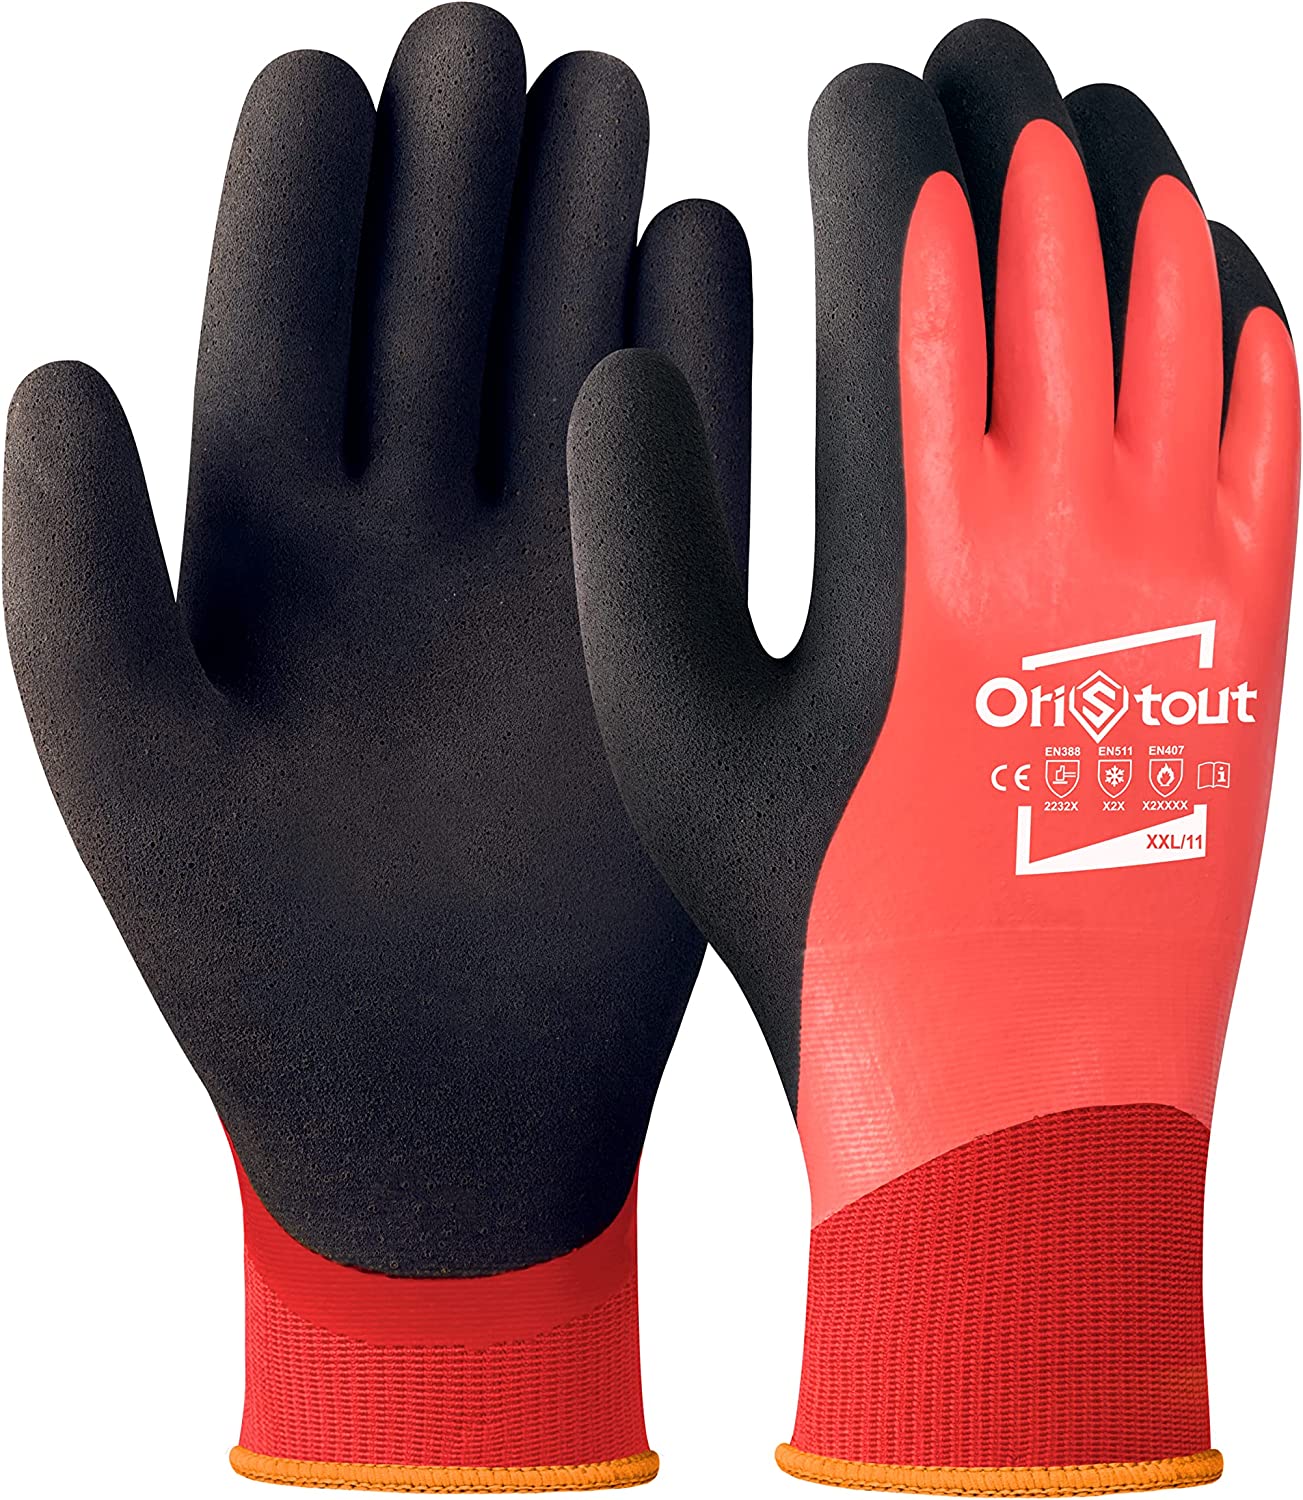 OriStout Winter Work Gloves for Men and Women, Touchscreen, Waterproof Gloves for Working in Freezer, Fishing and Gardening, The, Red